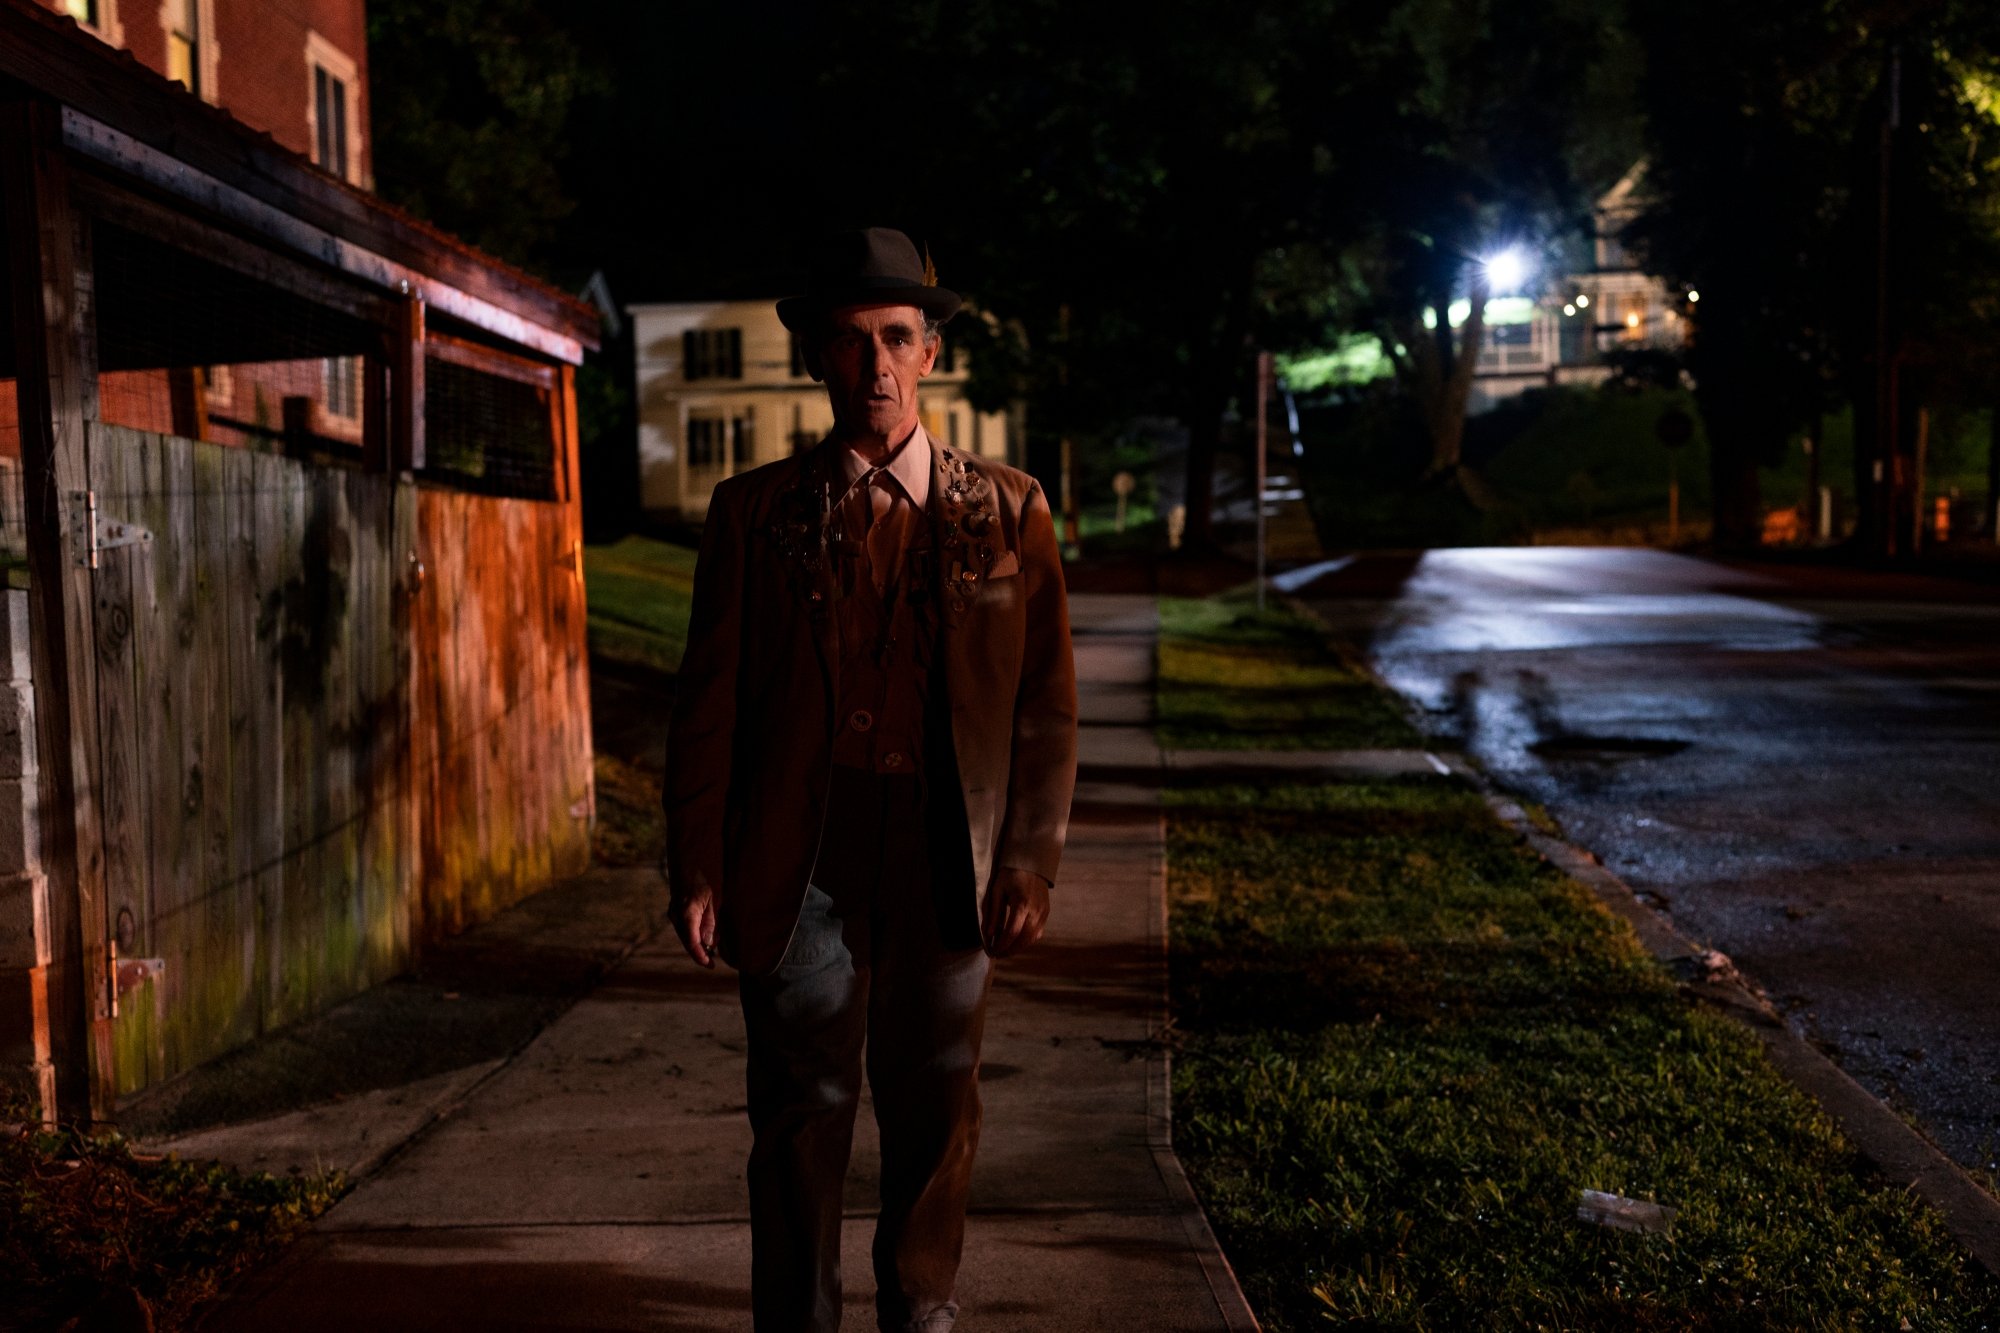 'Bones and All' Mark Rylance as Sully looking surprised standing on a dark street sidewalk. He's wearing a brown jacket, a collared shirt, and a hat.